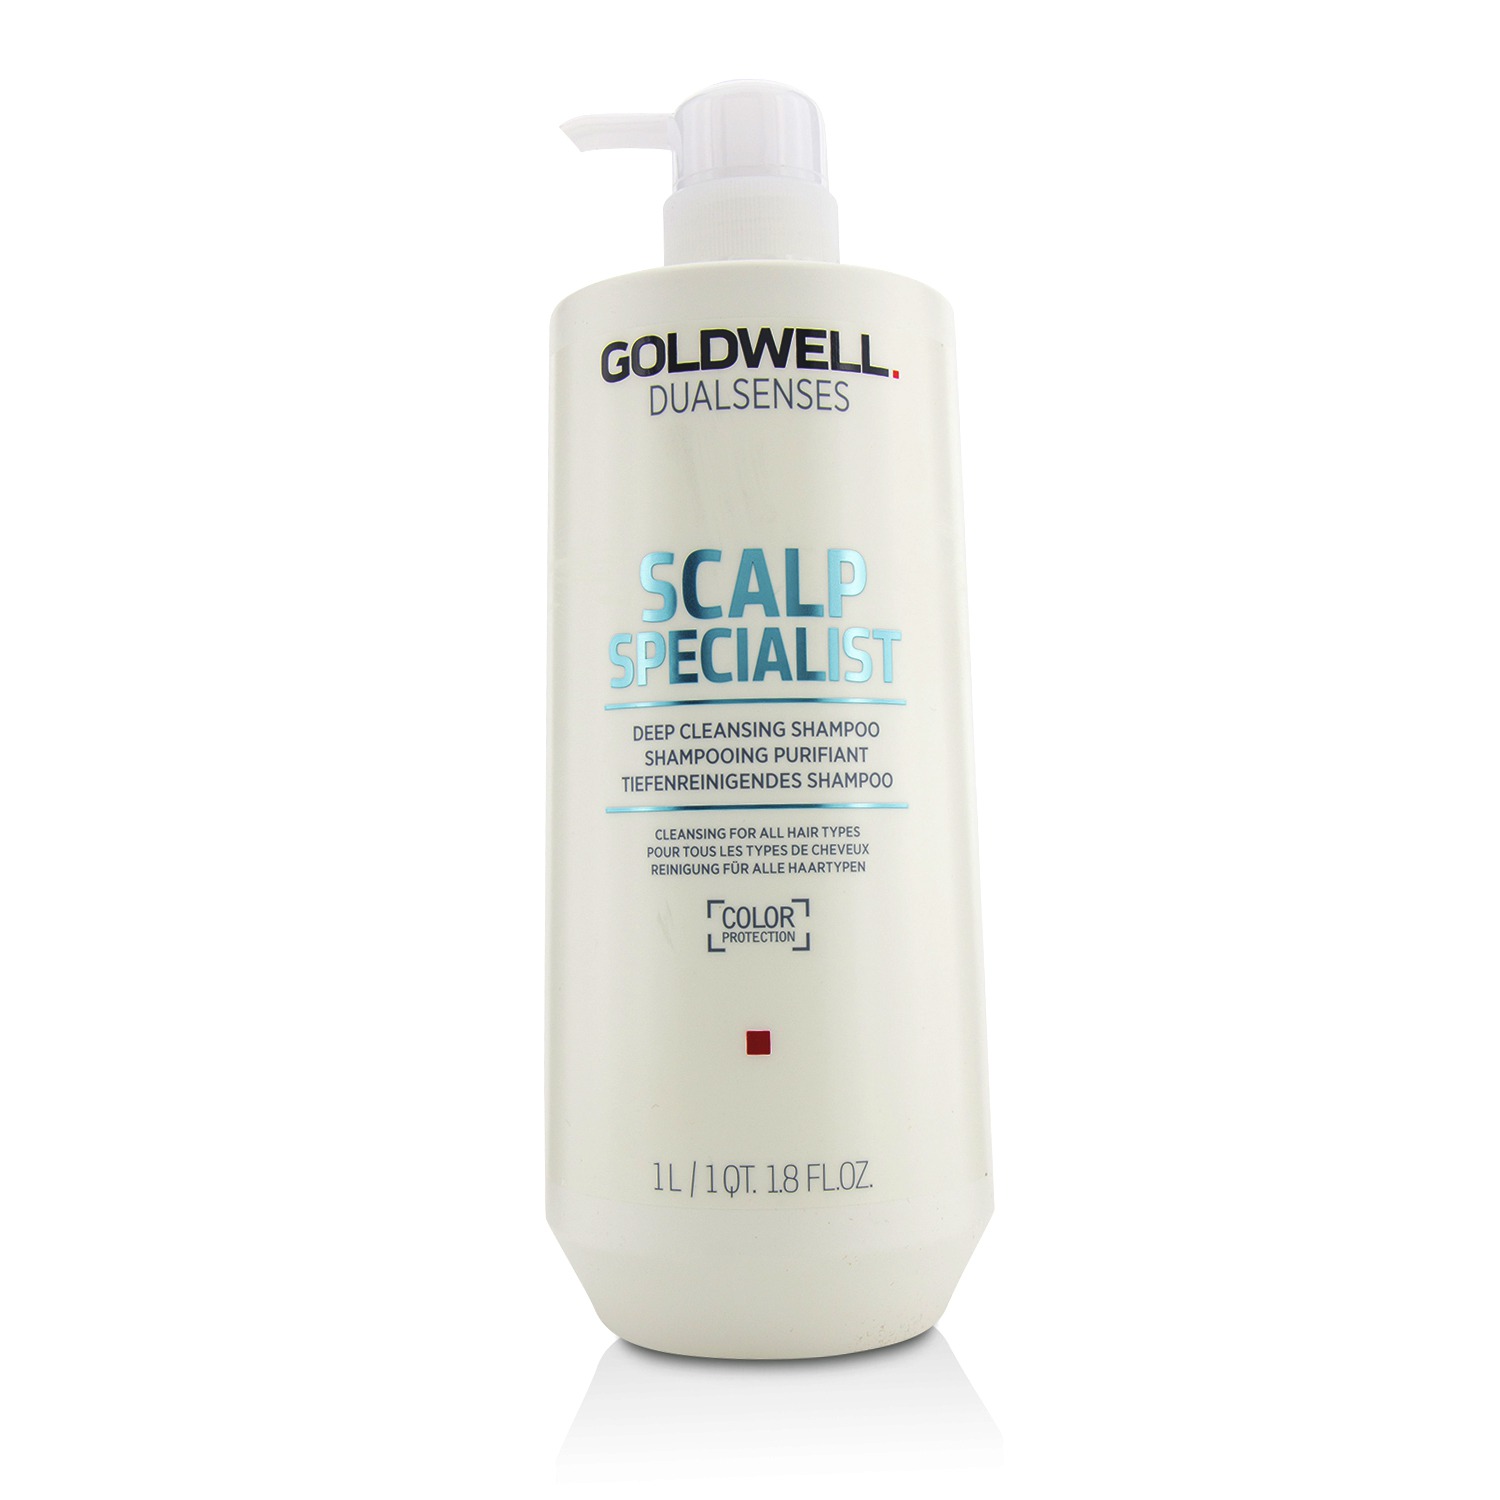 Dual Senses Scalp Specialist Deep Cleansing Shampoo (Cleansing For All Hair Types) Goldwell Image